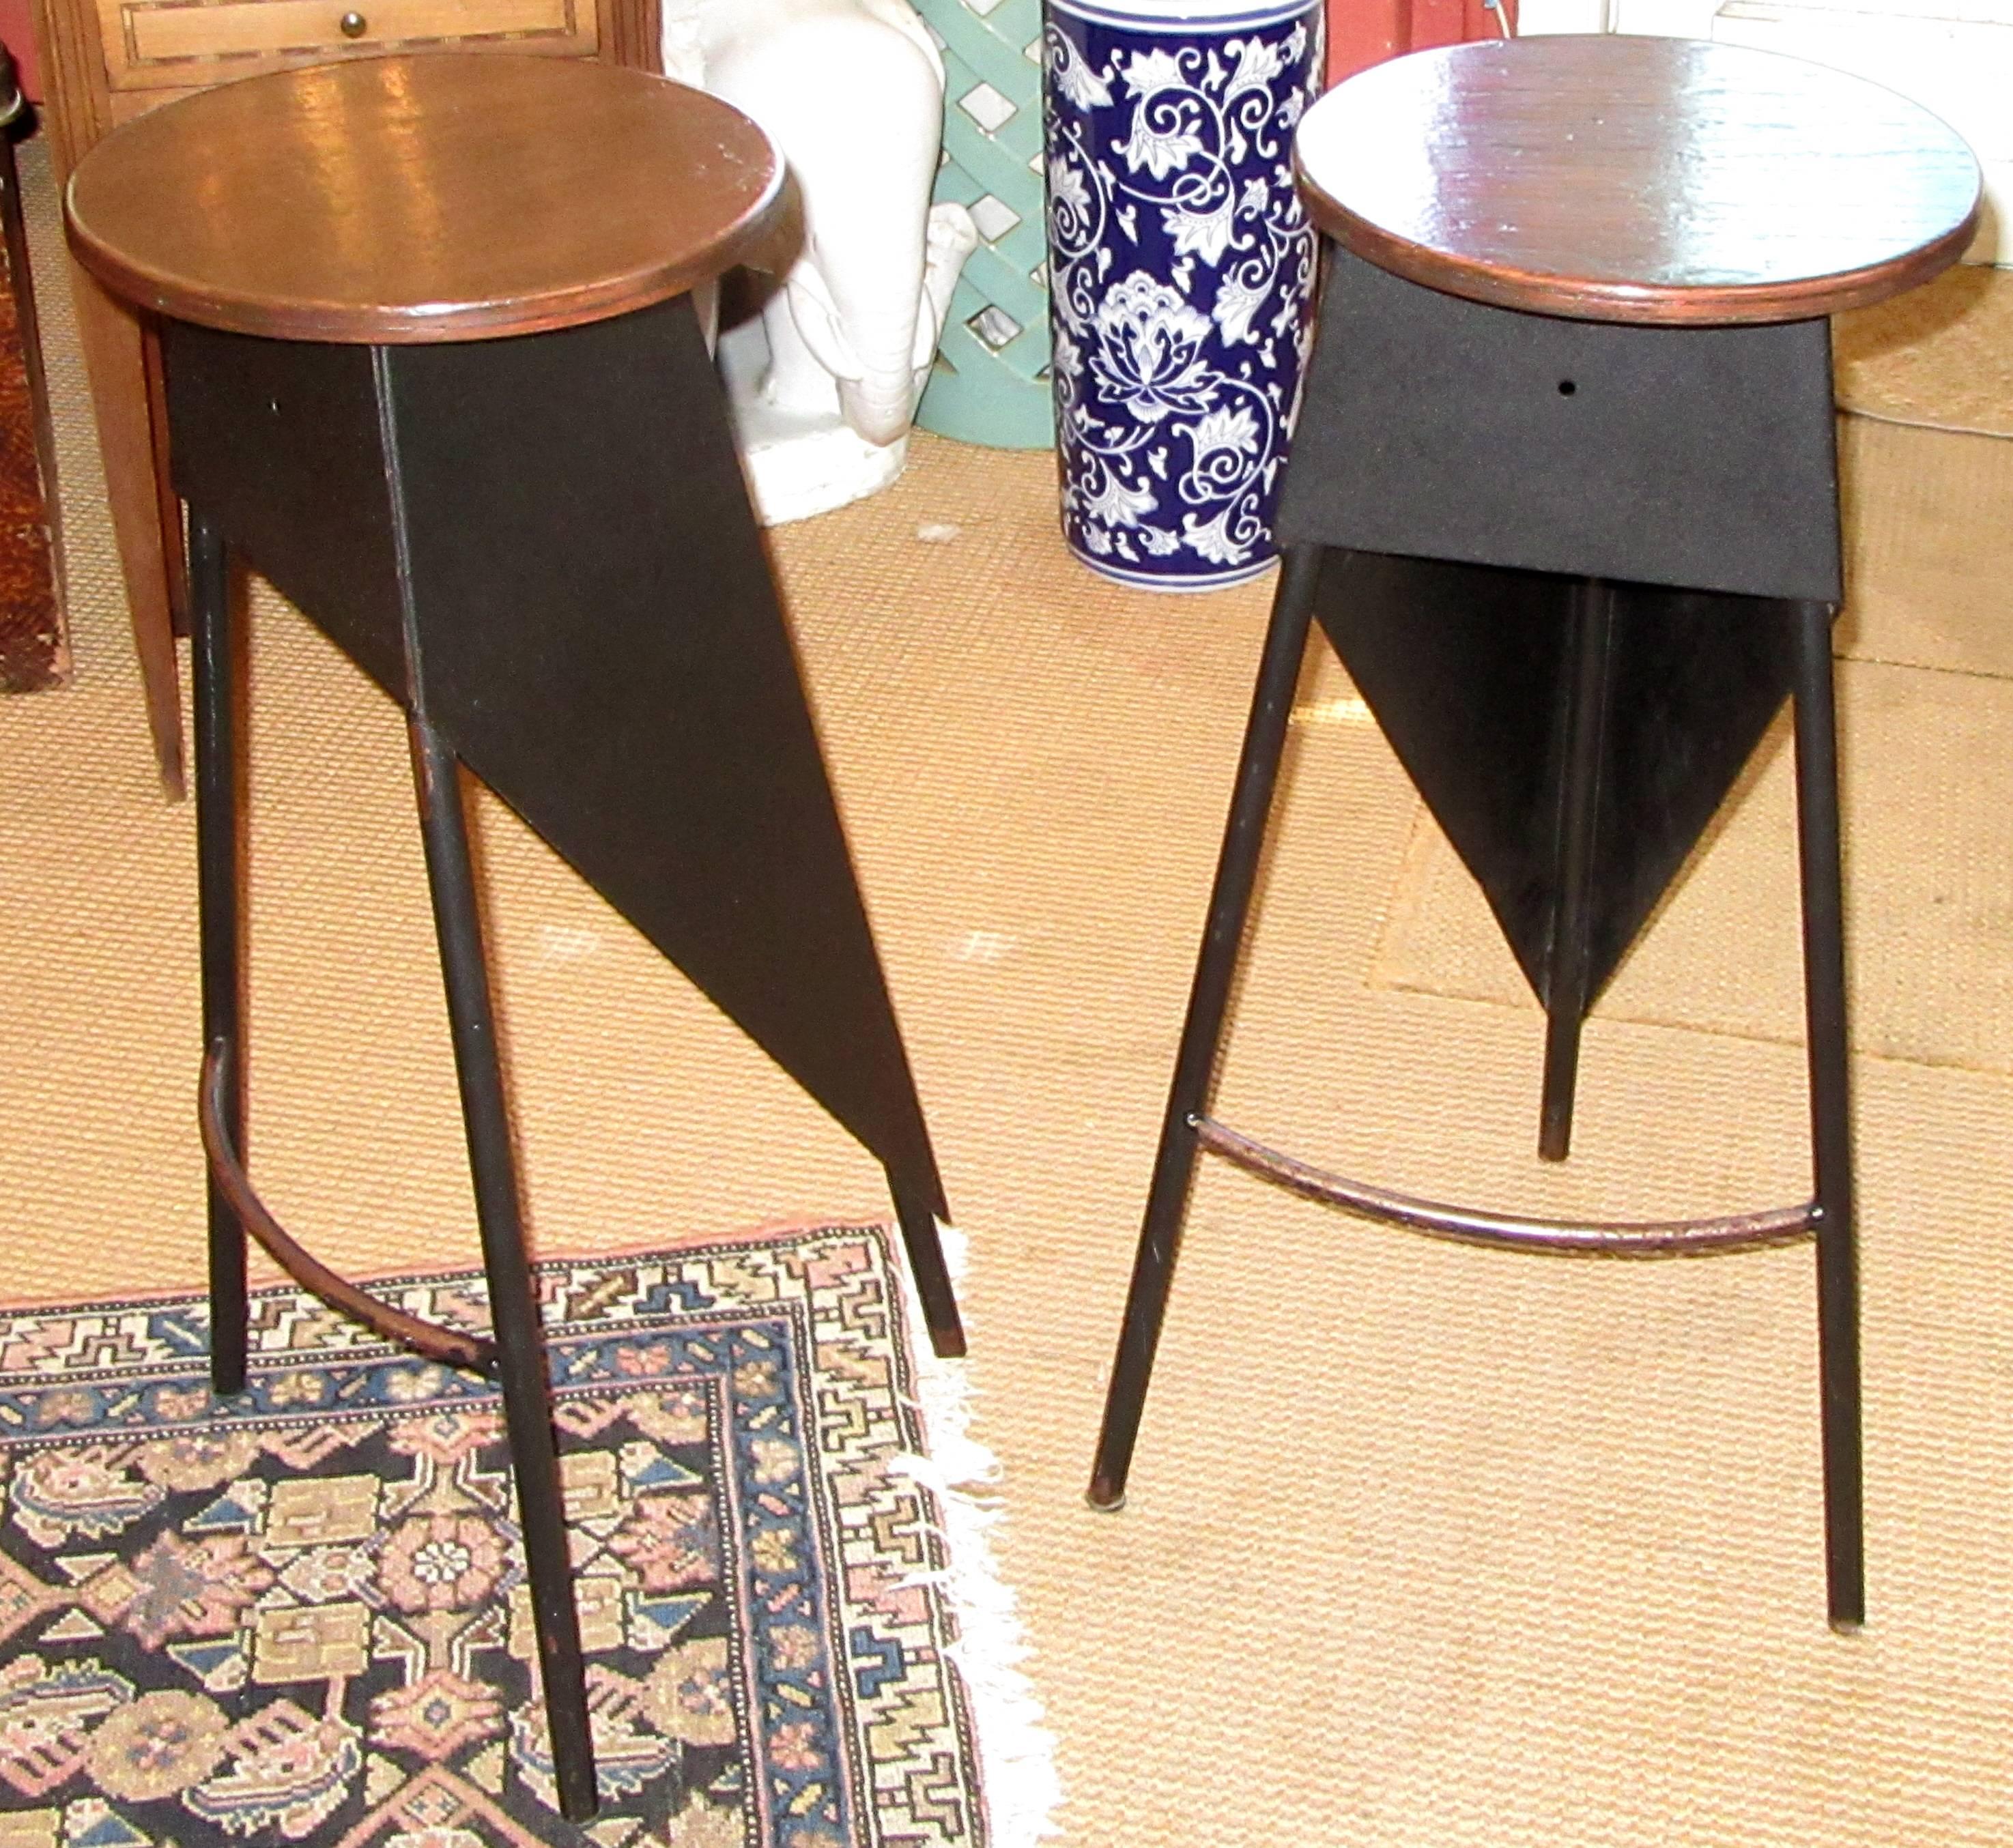 A pair of black painted steel stools with round wood seats. Geometric design with a rounded footrest, topped with stained and lacquered pressed wood seats.